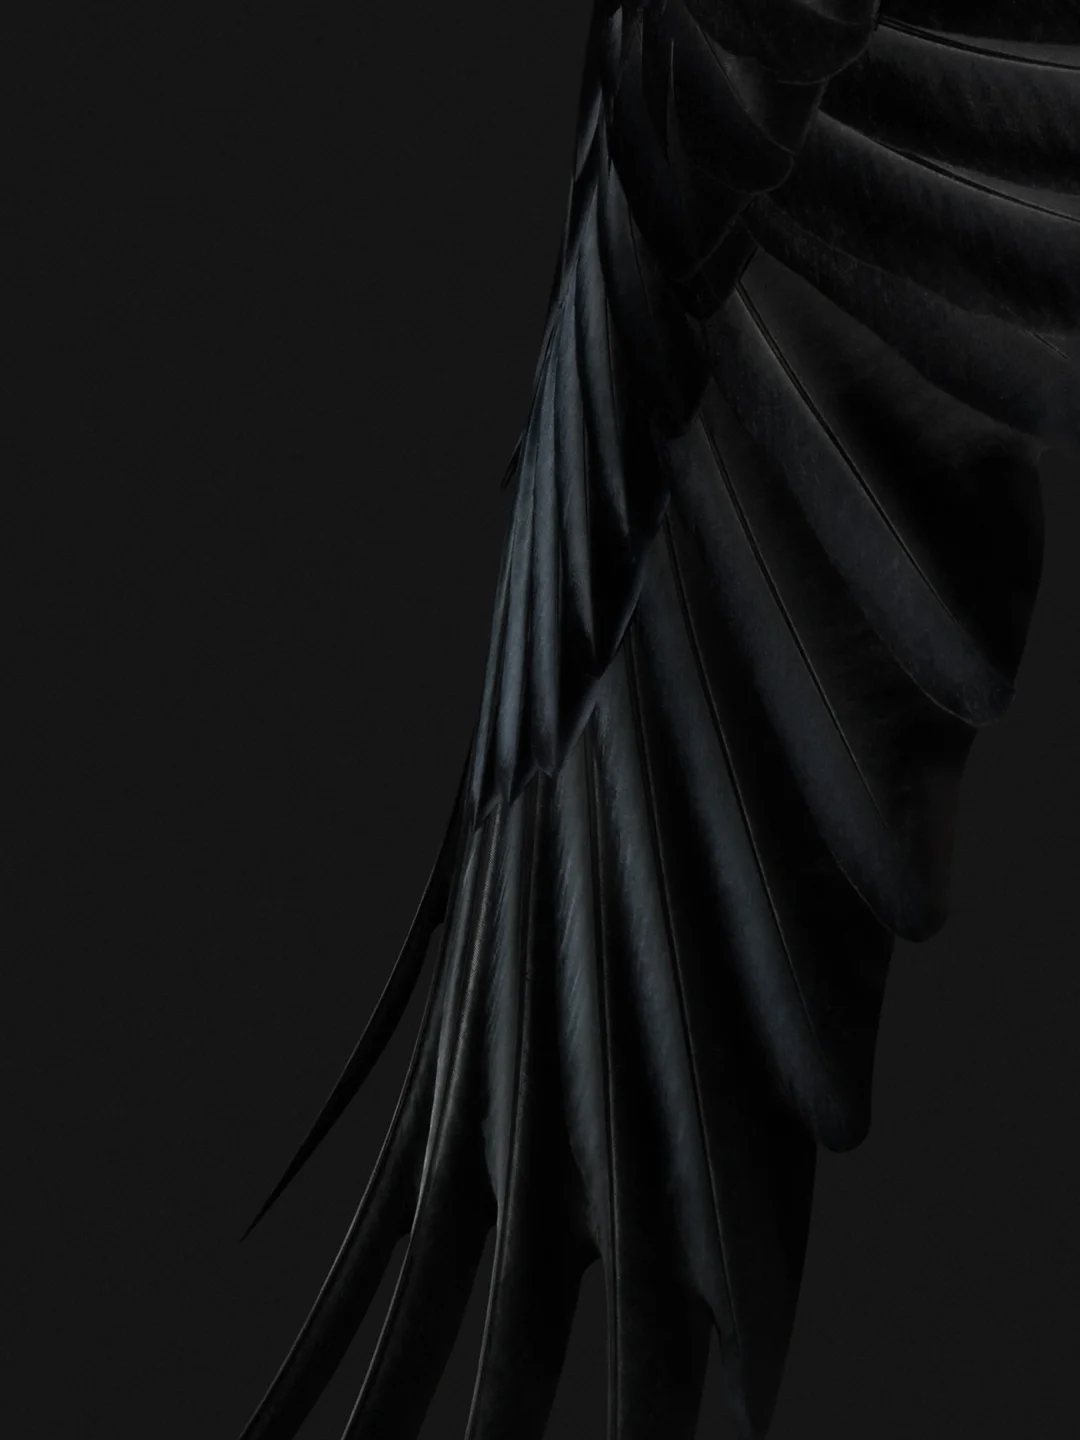 A black dress with a black background - Wings, feathers